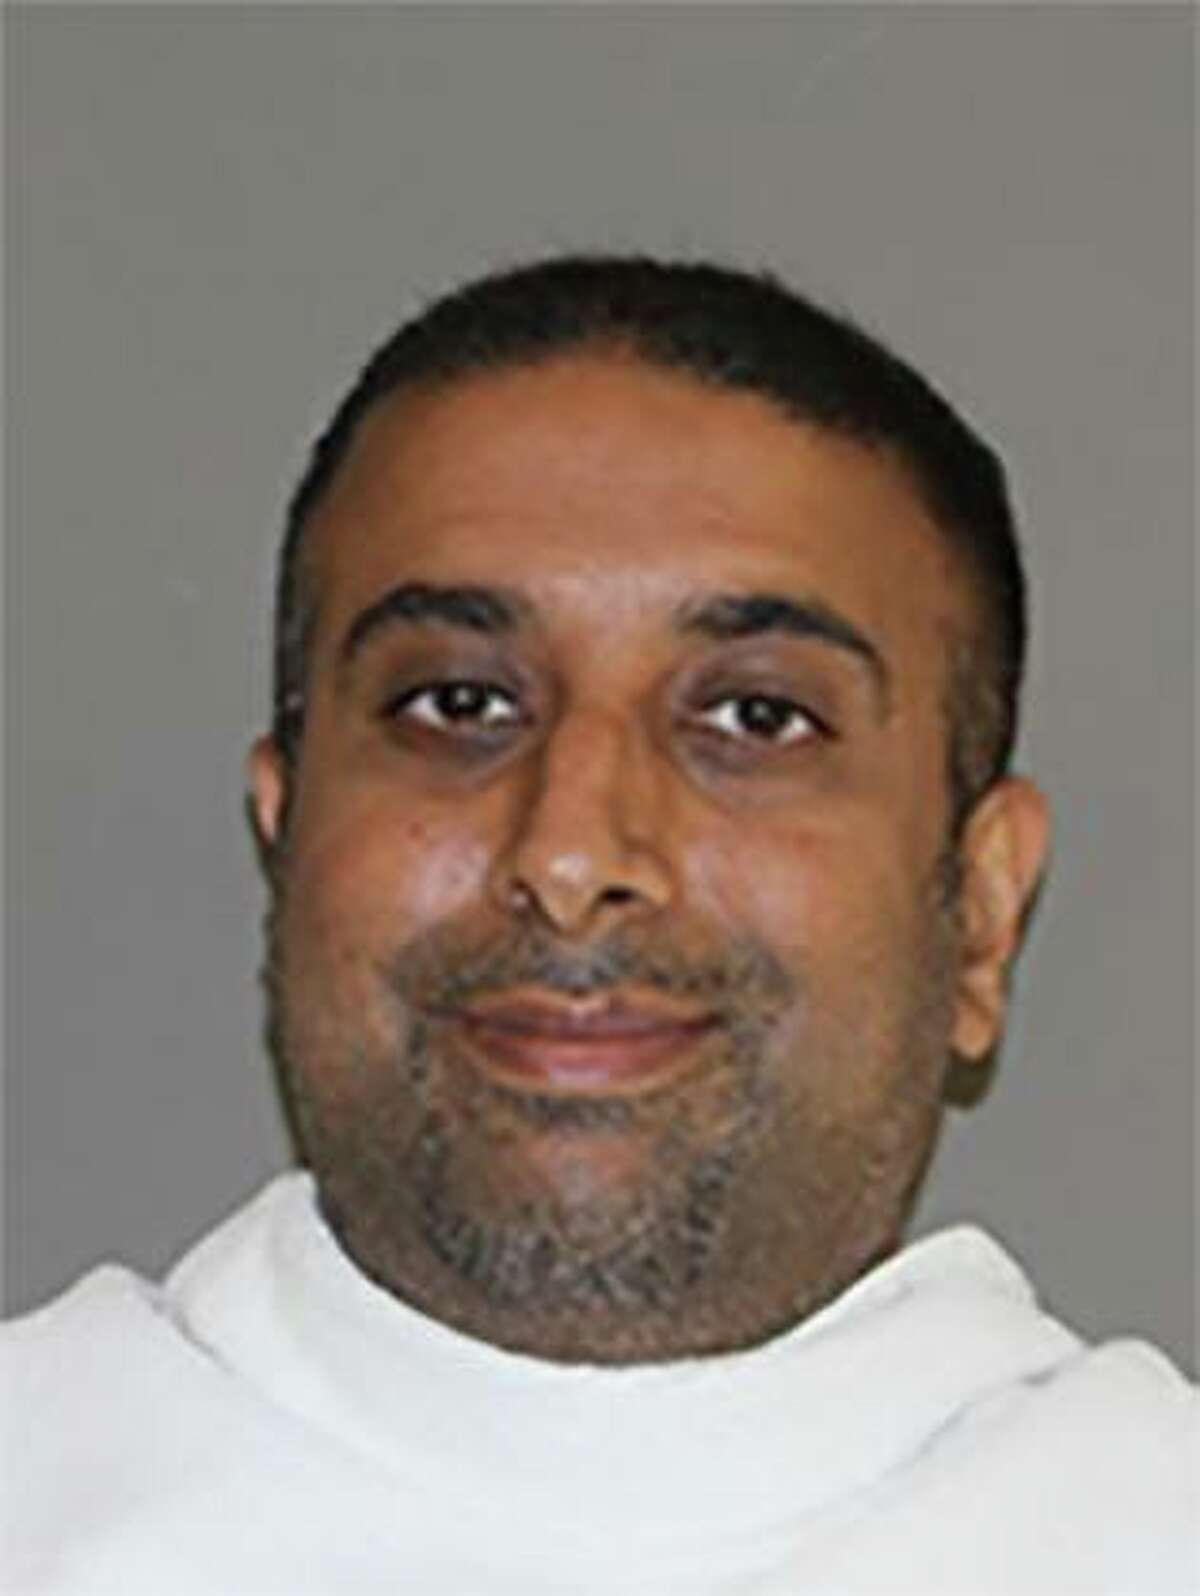 Zul Mirza Mohamed, a Carrollton mayoral candidate, was arrested on Oct. 7 and charged with more than 100 felonies related to voter fraud.